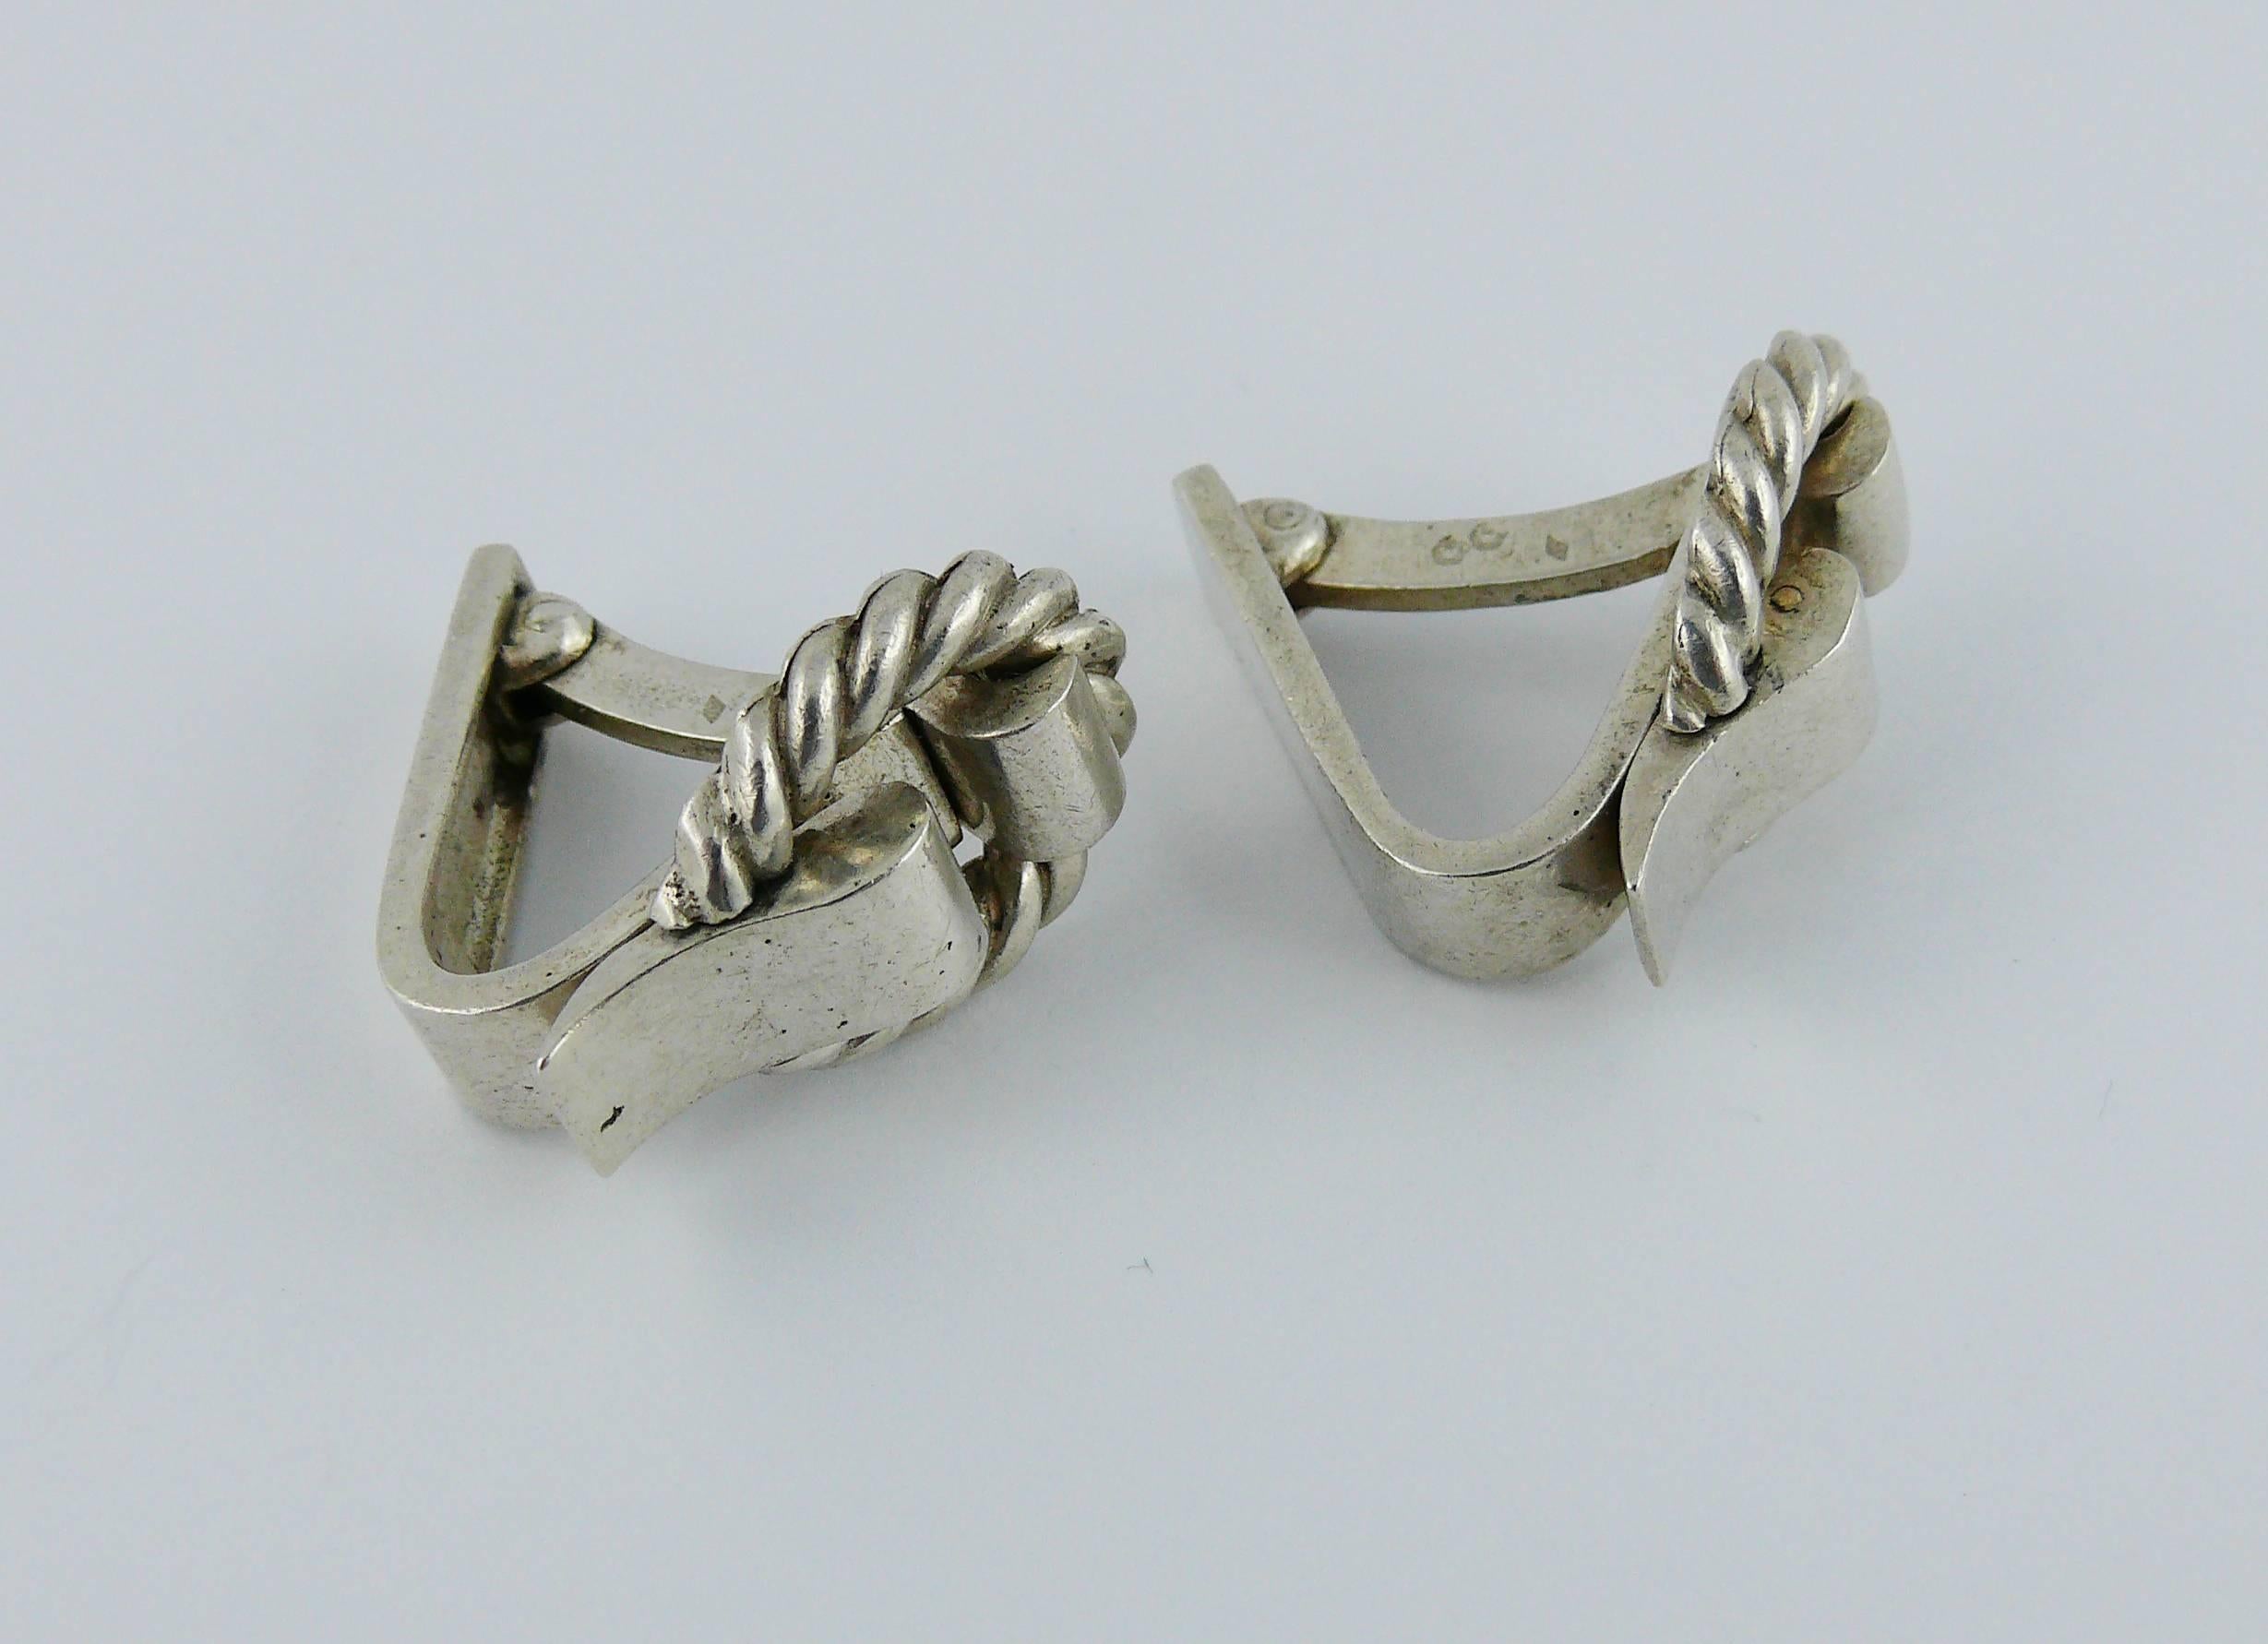 HERMES vintage silver cufflinks.

Embossed HERMES and number "53378" on one cufflink (the other has no HERMES marking).
Both cufflinks have both French silver and maker's hallmarks.

Indicative measurements : max. height approx. 2 cm (0.79